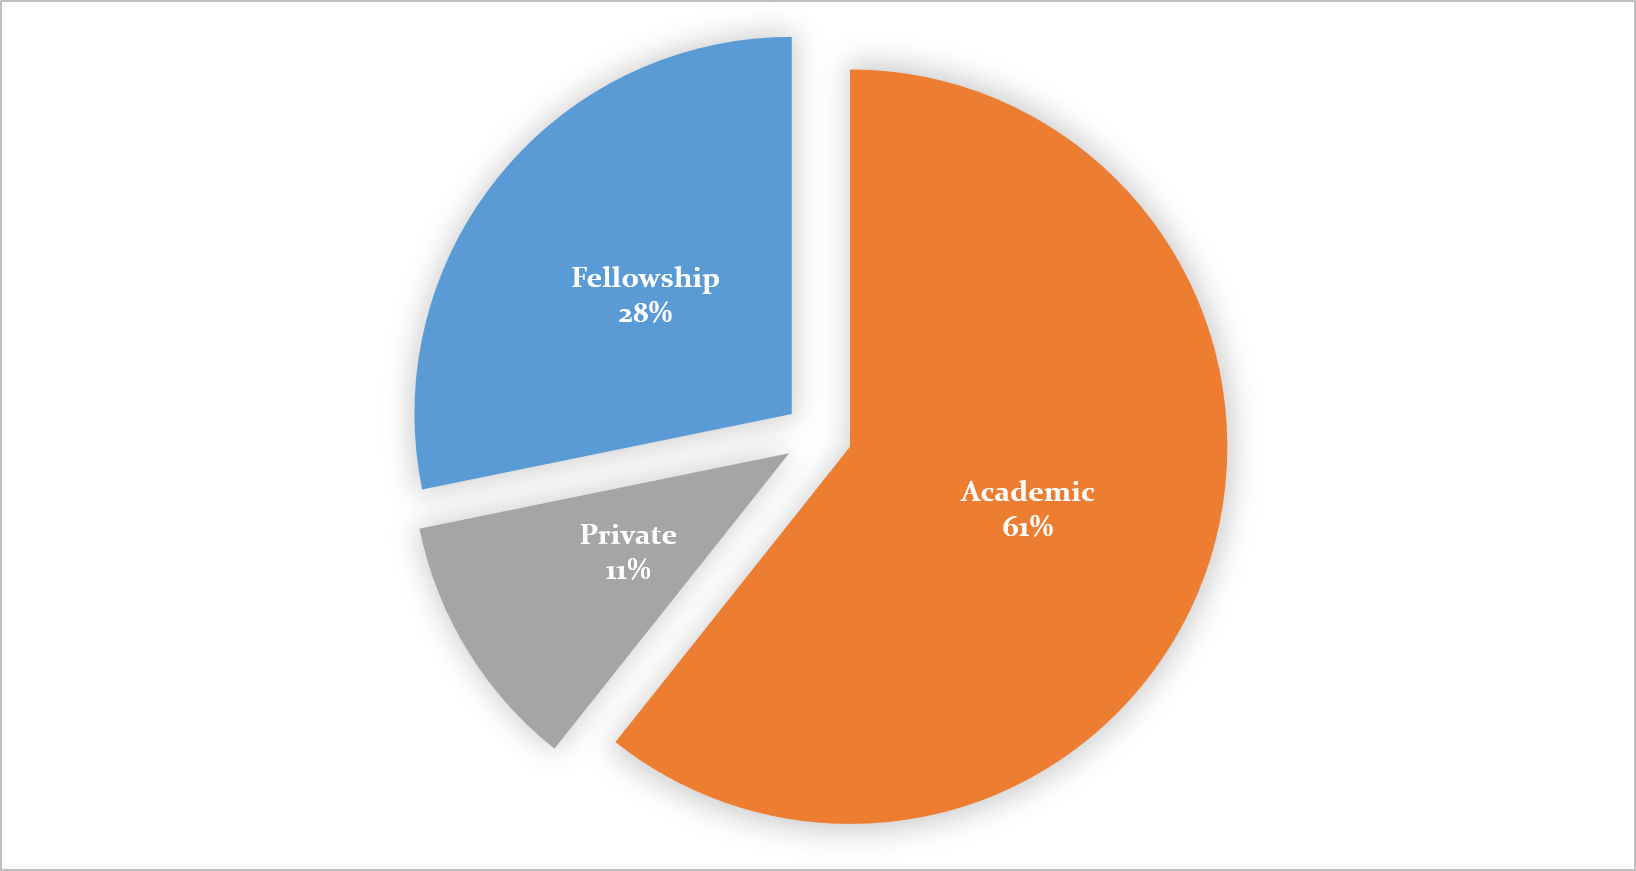 Anesthesiology Residency Program - pie chart of the graduated fellows, what percentage went on to academic vs. private positions